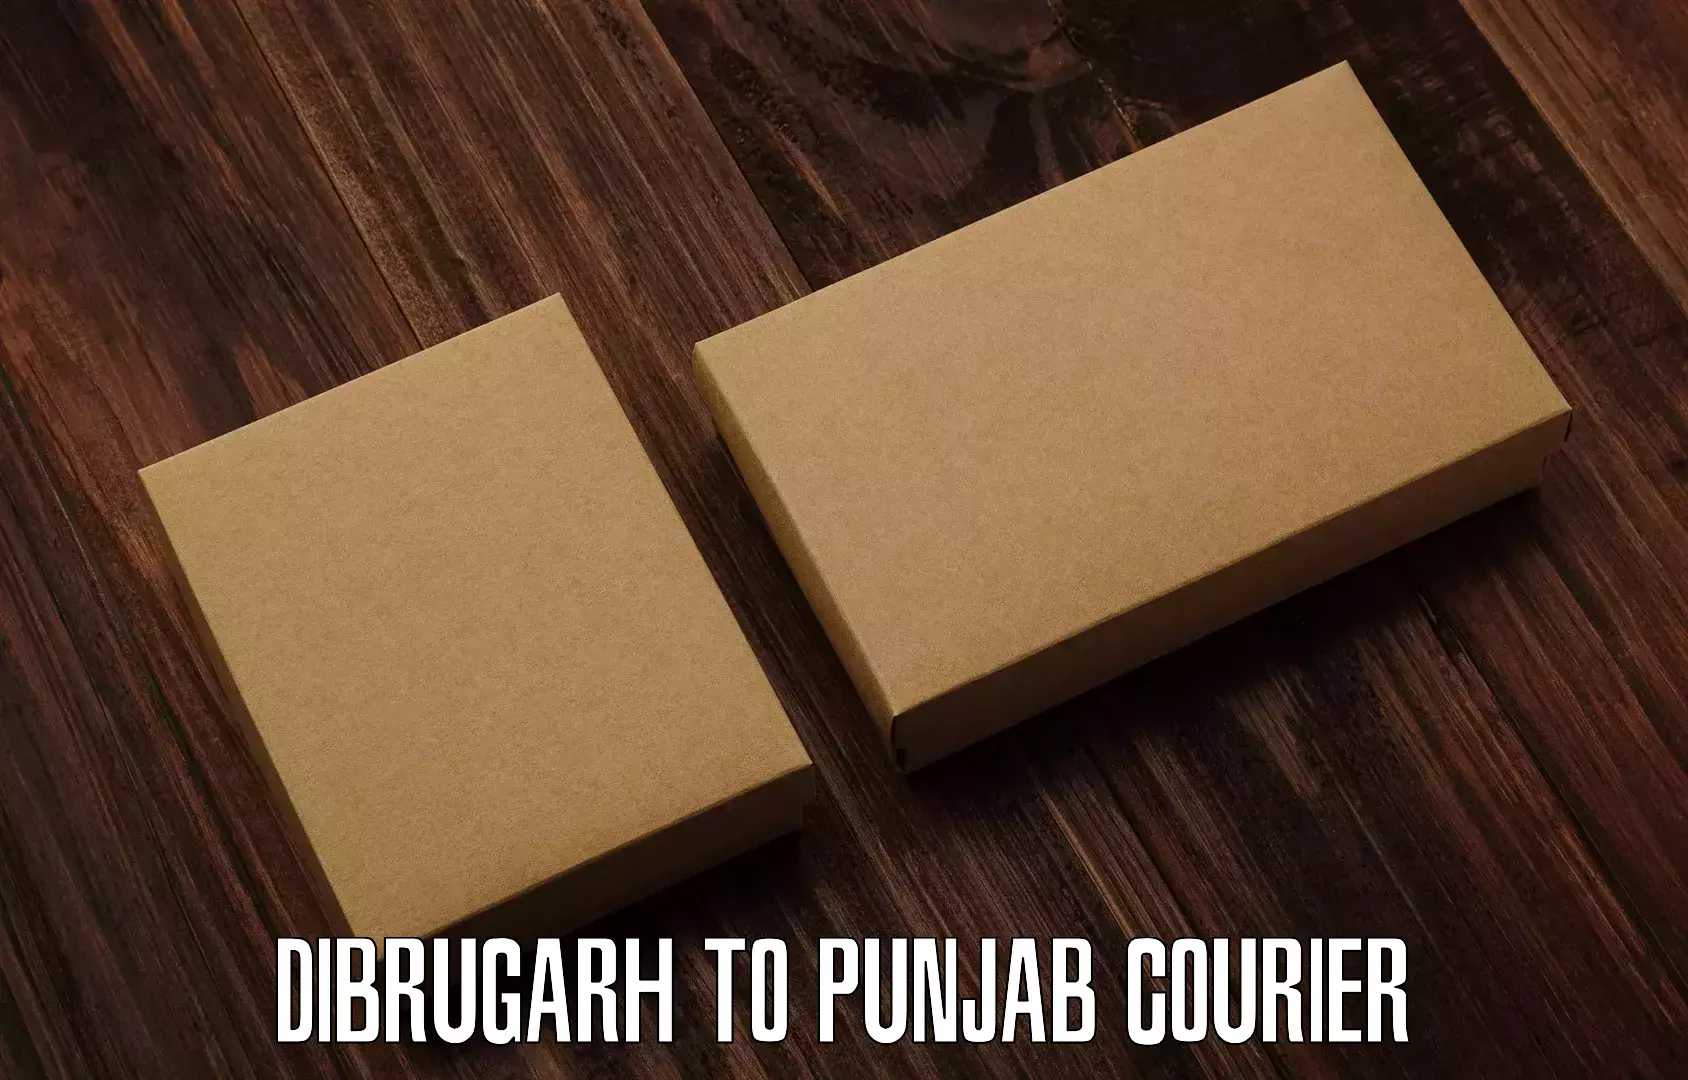 Next-day delivery options Dibrugarh to Zirakpur